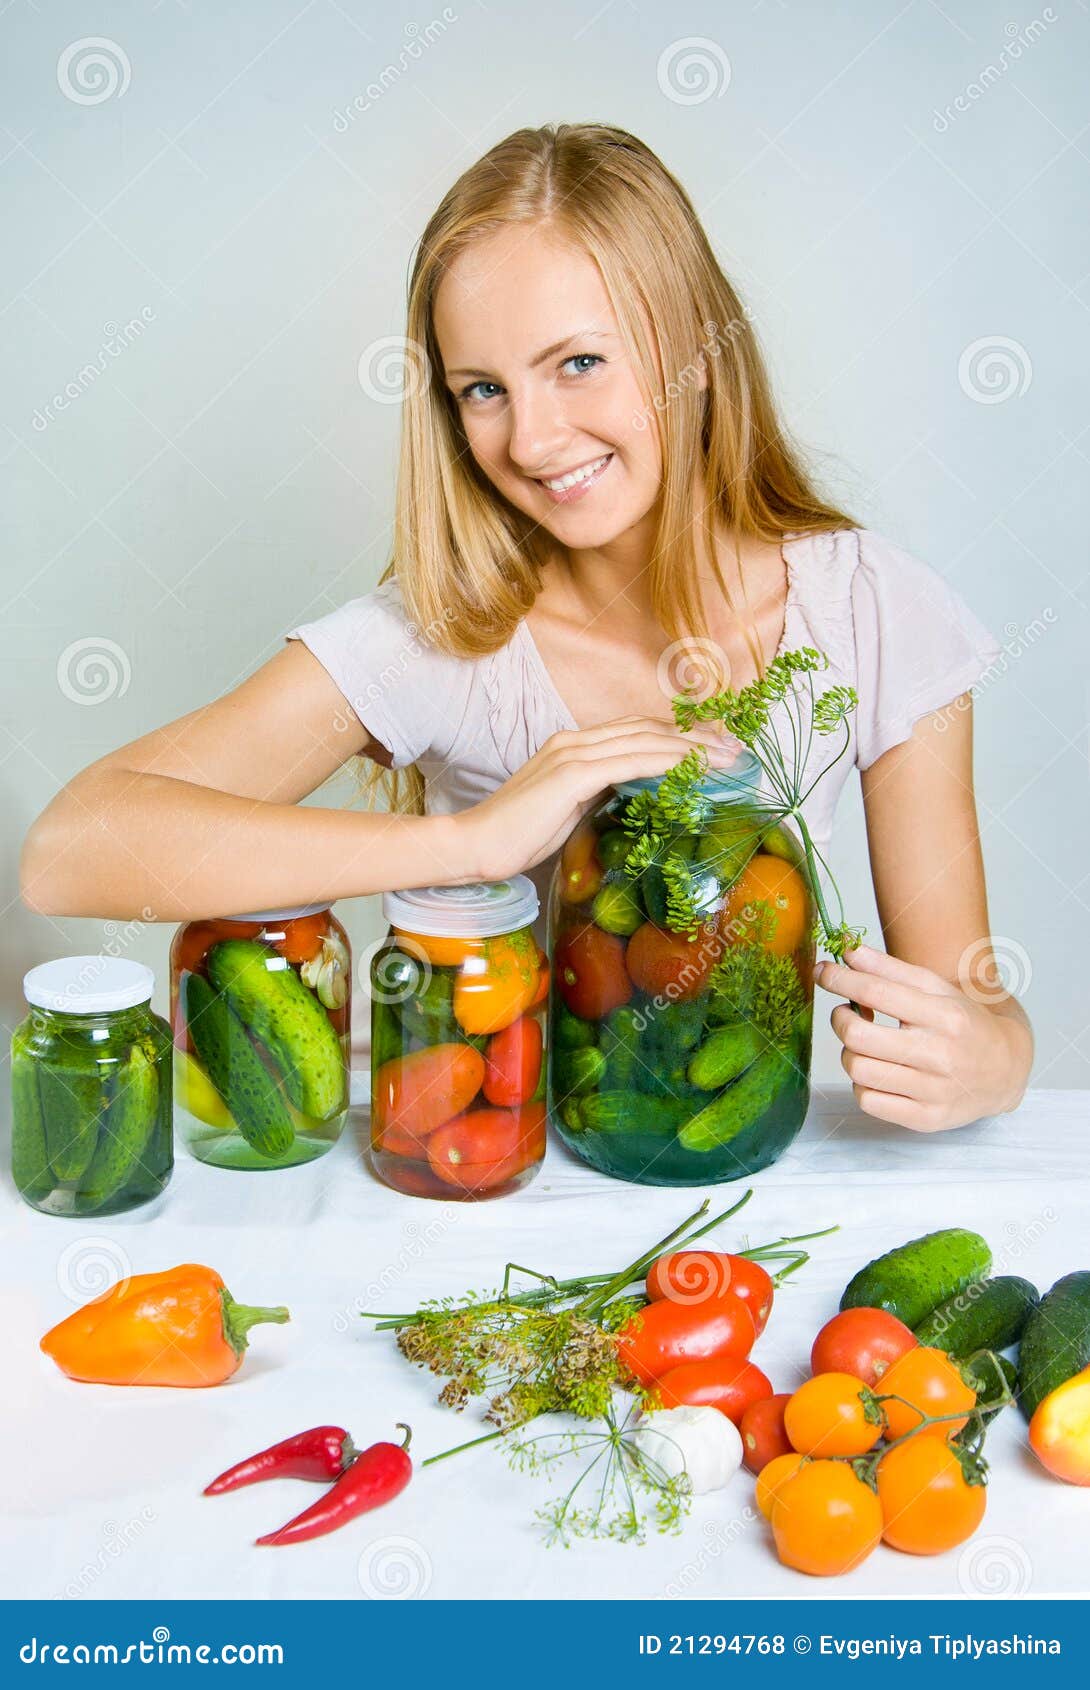 A girl can the vegetables stock photo. Image of homemade - 21294768